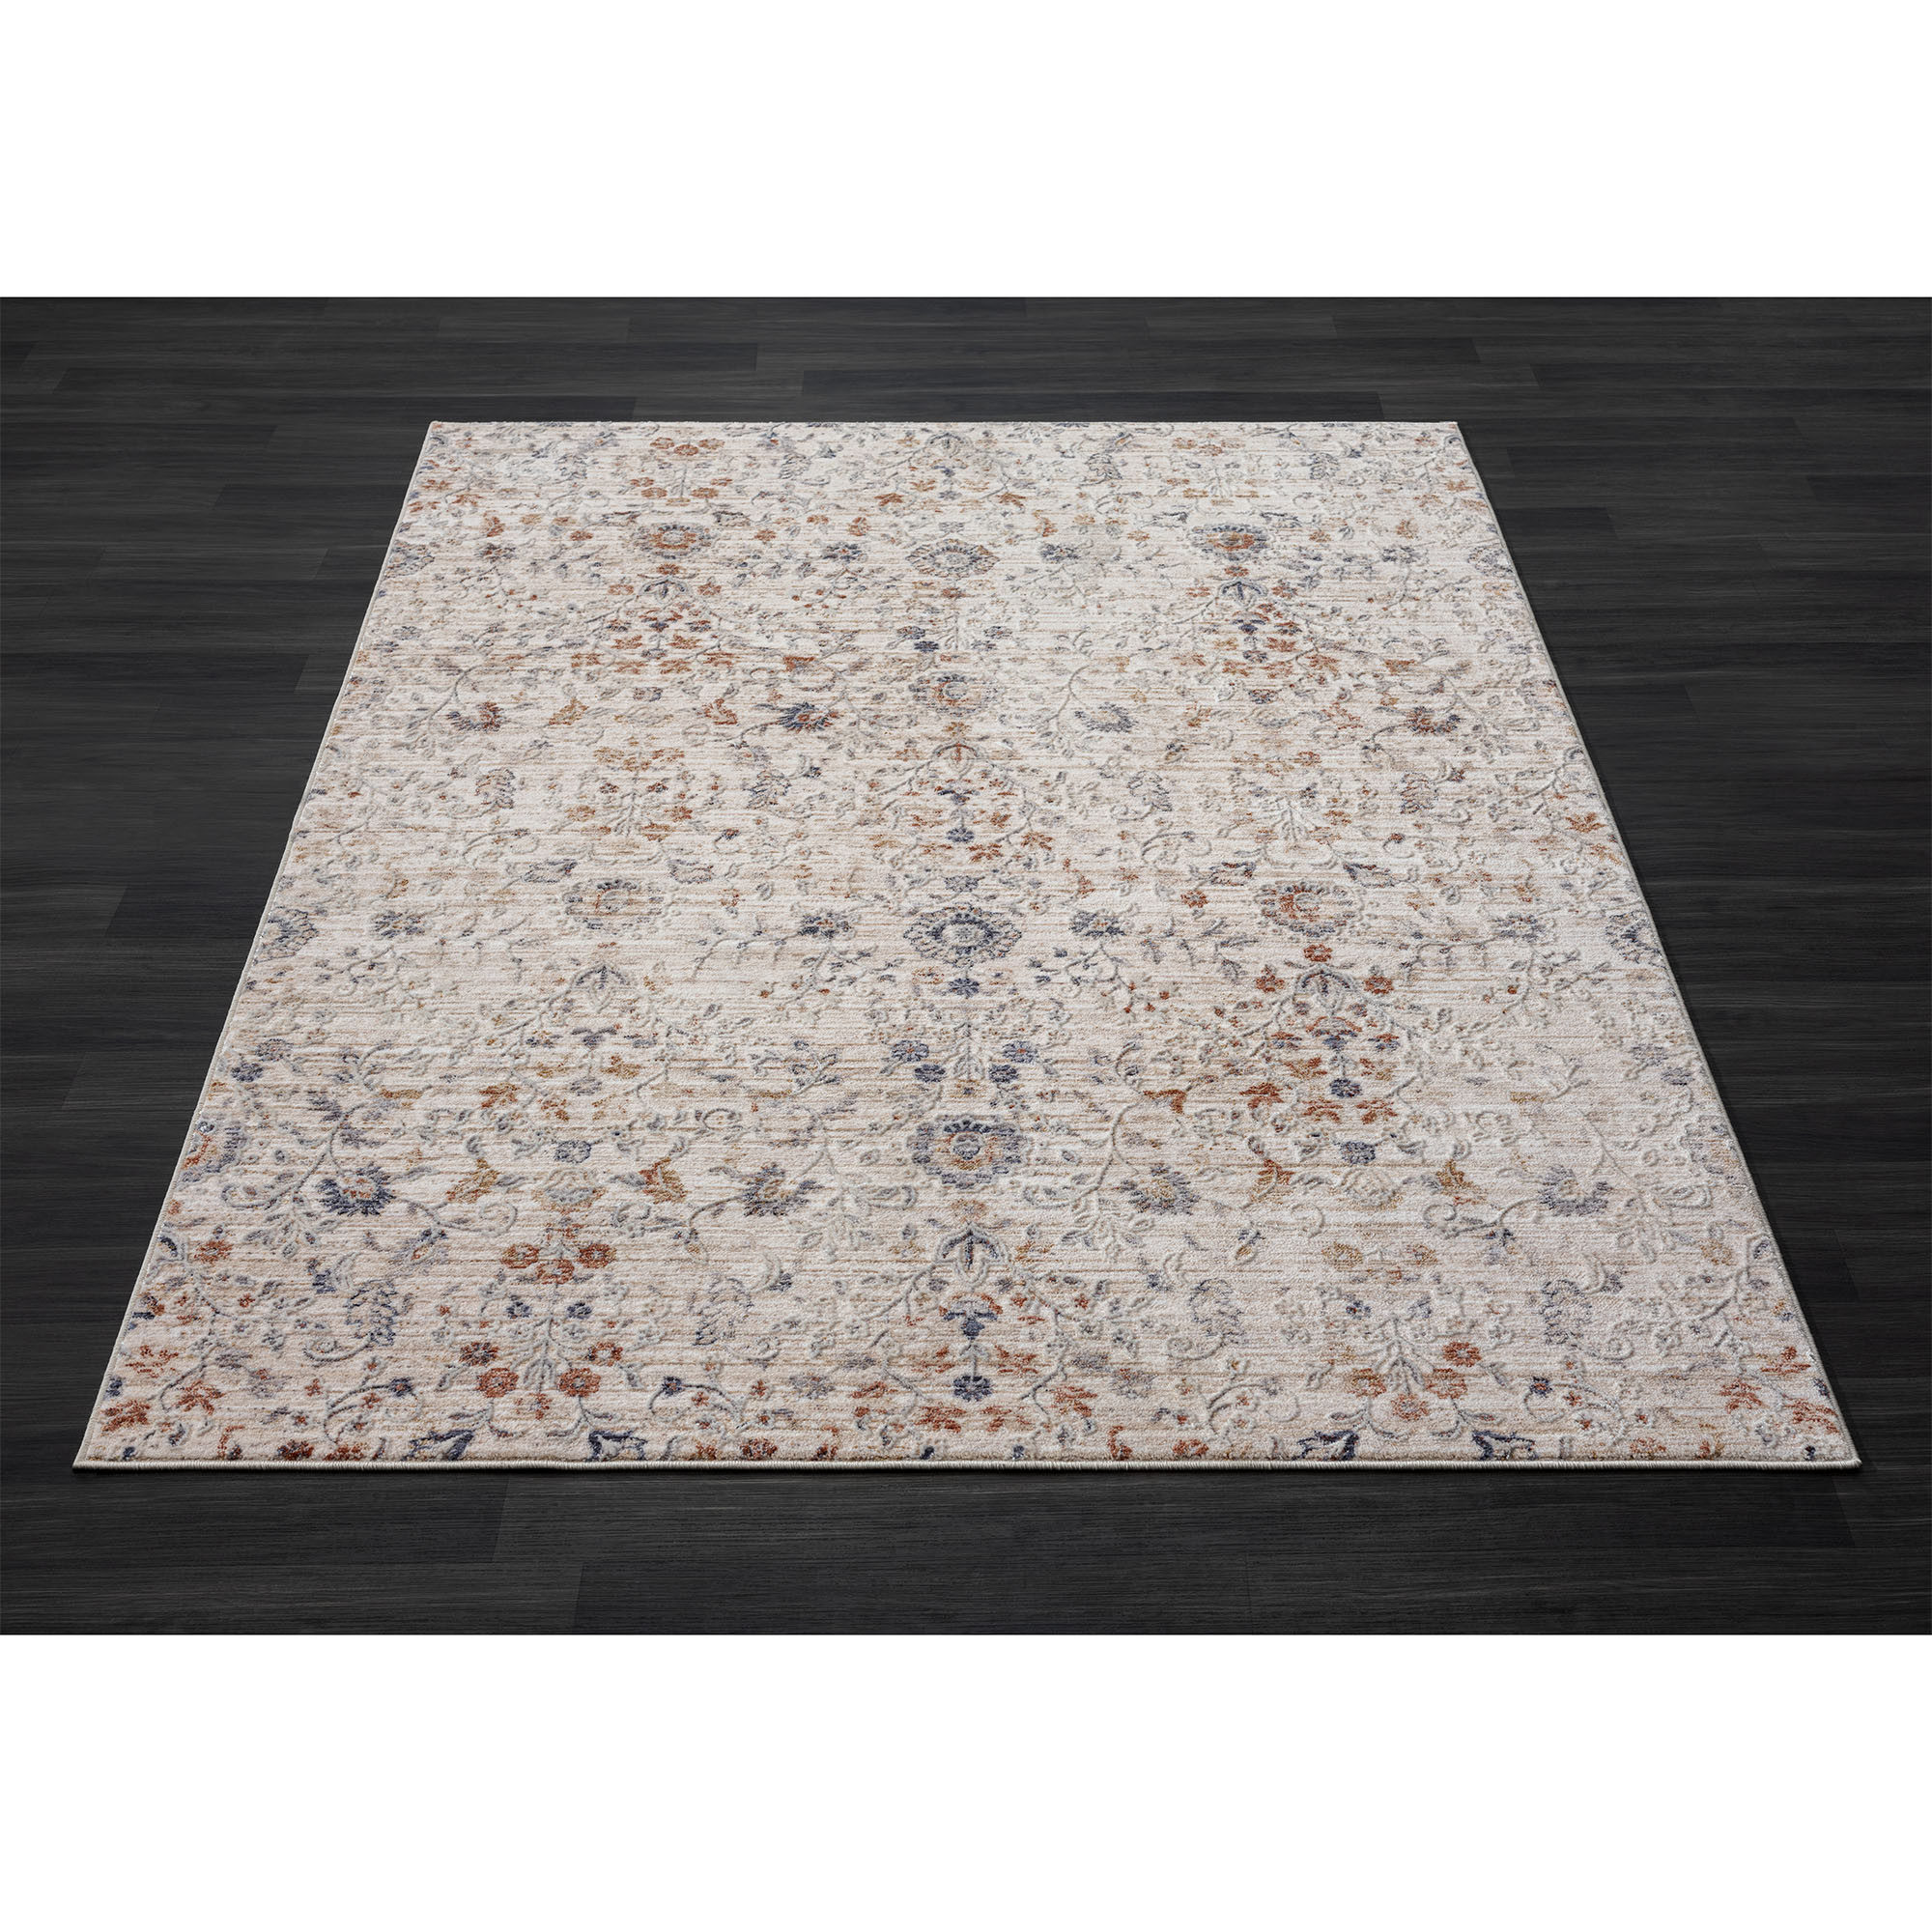 5' X 8' Ivory Floral Area Rug-516016-1